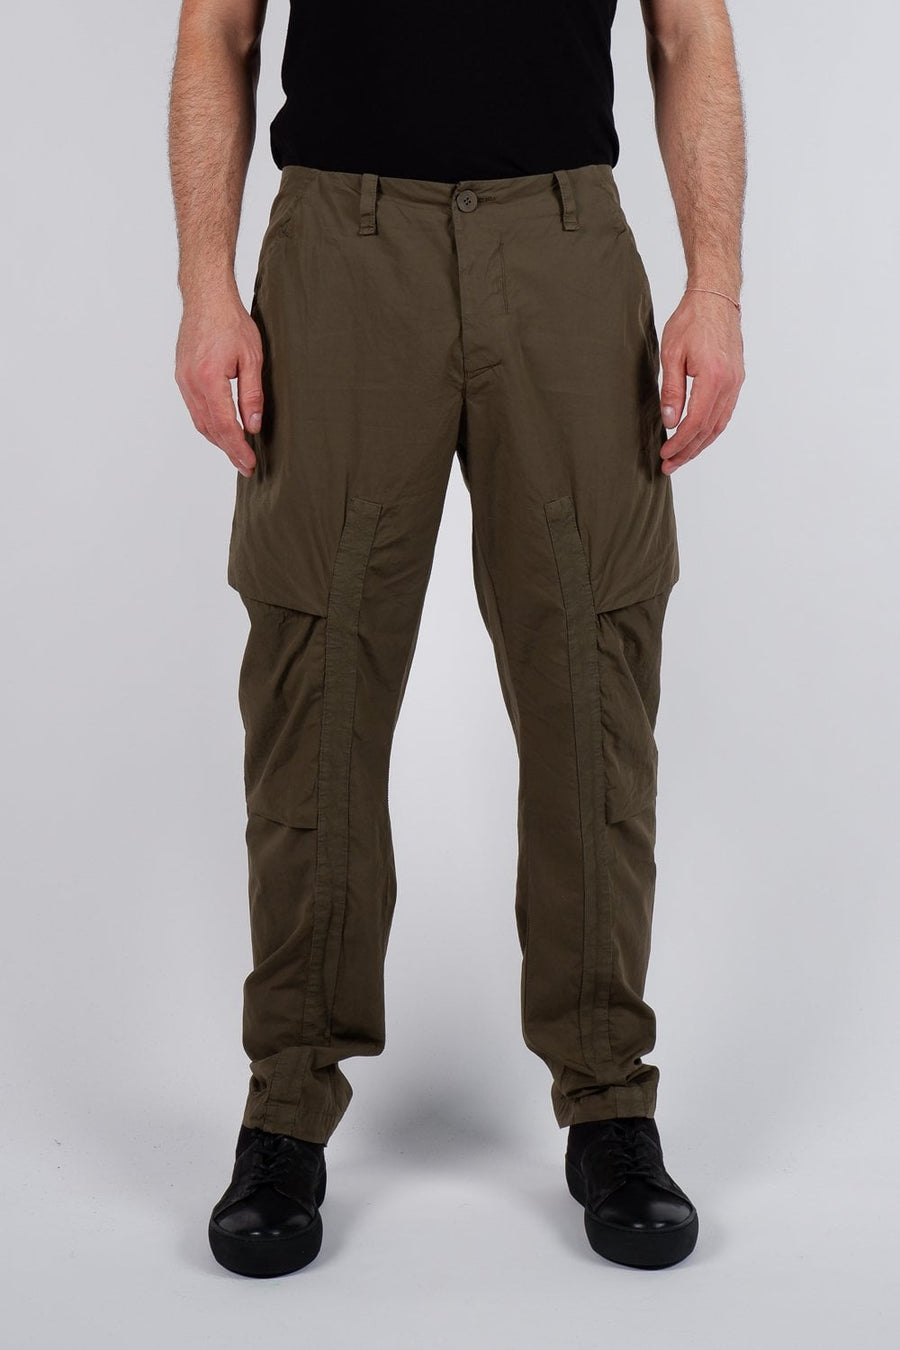 Buy the Transit Lightweight Cargo Trousers in Khaki at Intro. Spend £50 for free UK delivery. Official stockists. We ship worldwide.